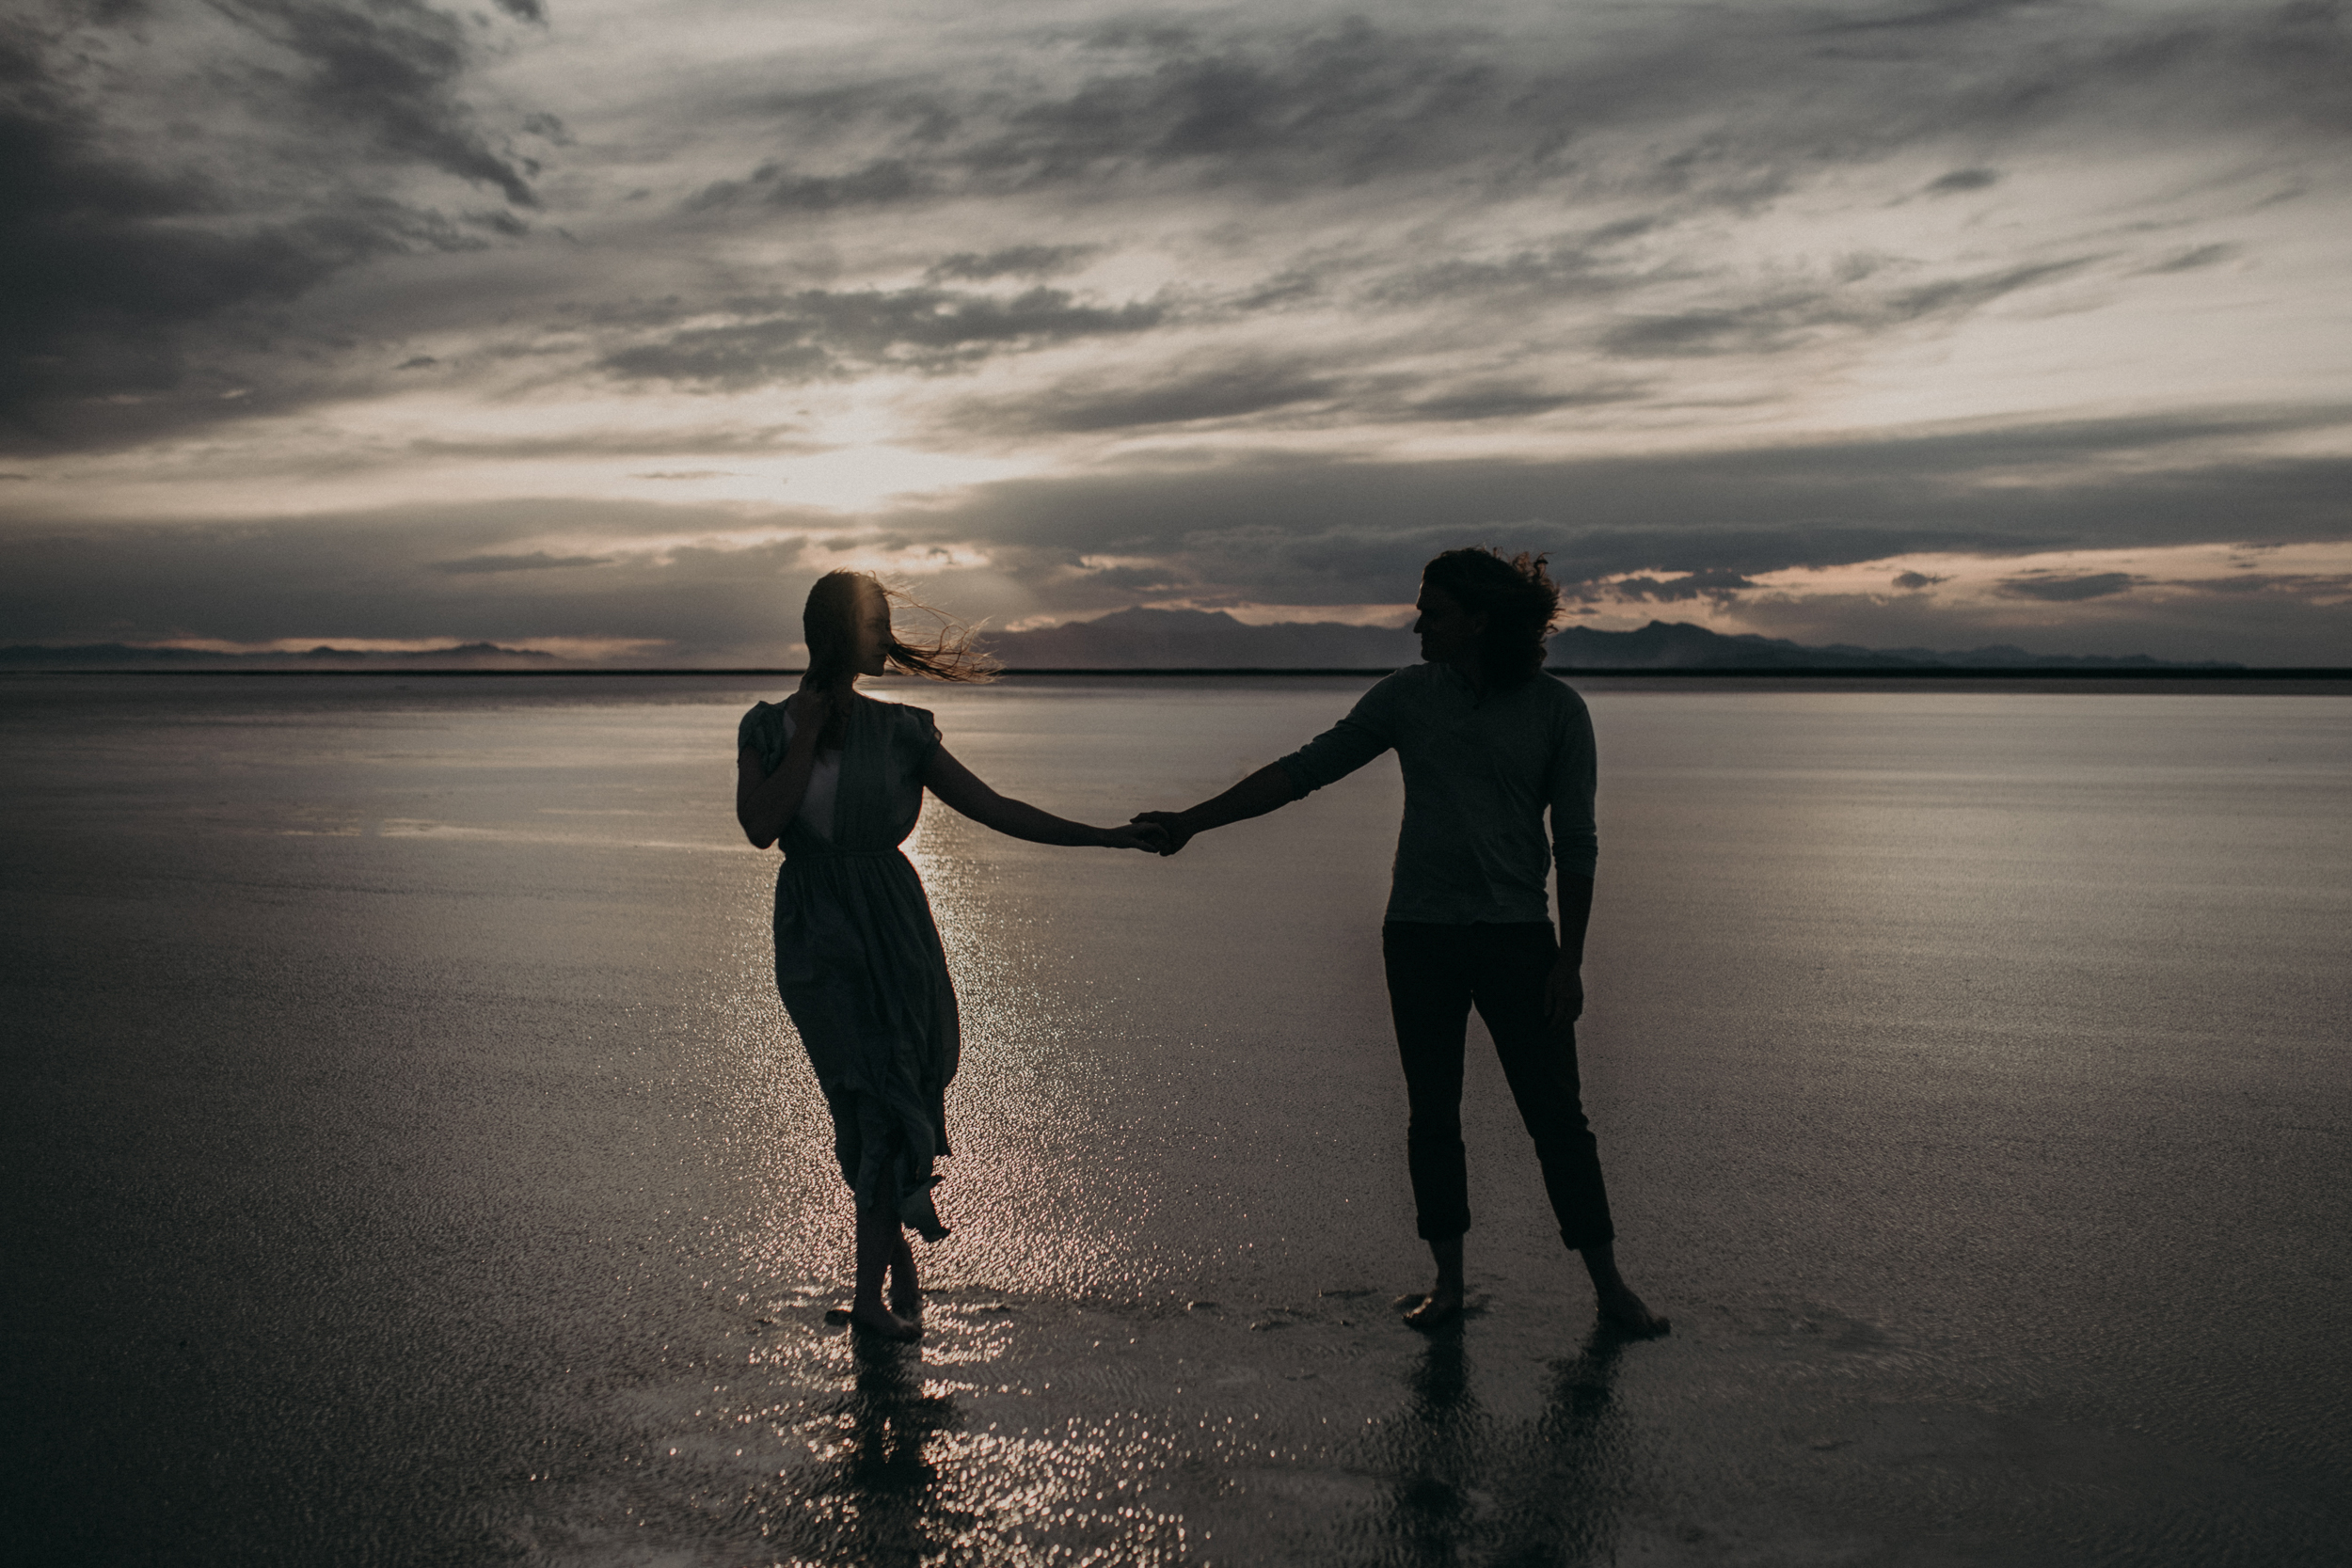 Silhouette of couple on water with mountains in background at sunset